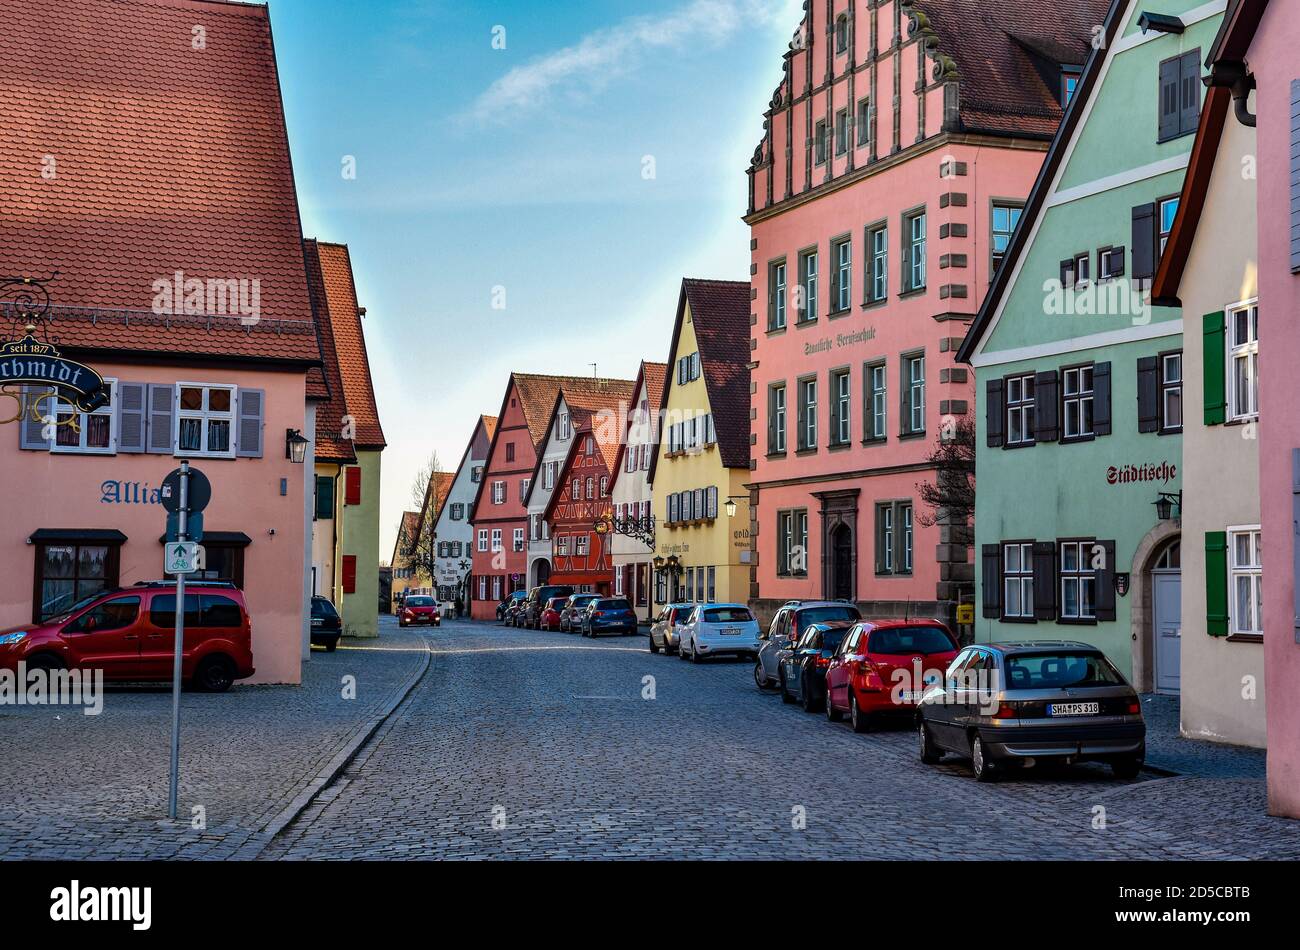 19 Dec 2015: Dinkelsbühl at christmass time. Colorful Half-Timbered  house, houses. Baden-Wurttemberg, Germany. Stock Photo